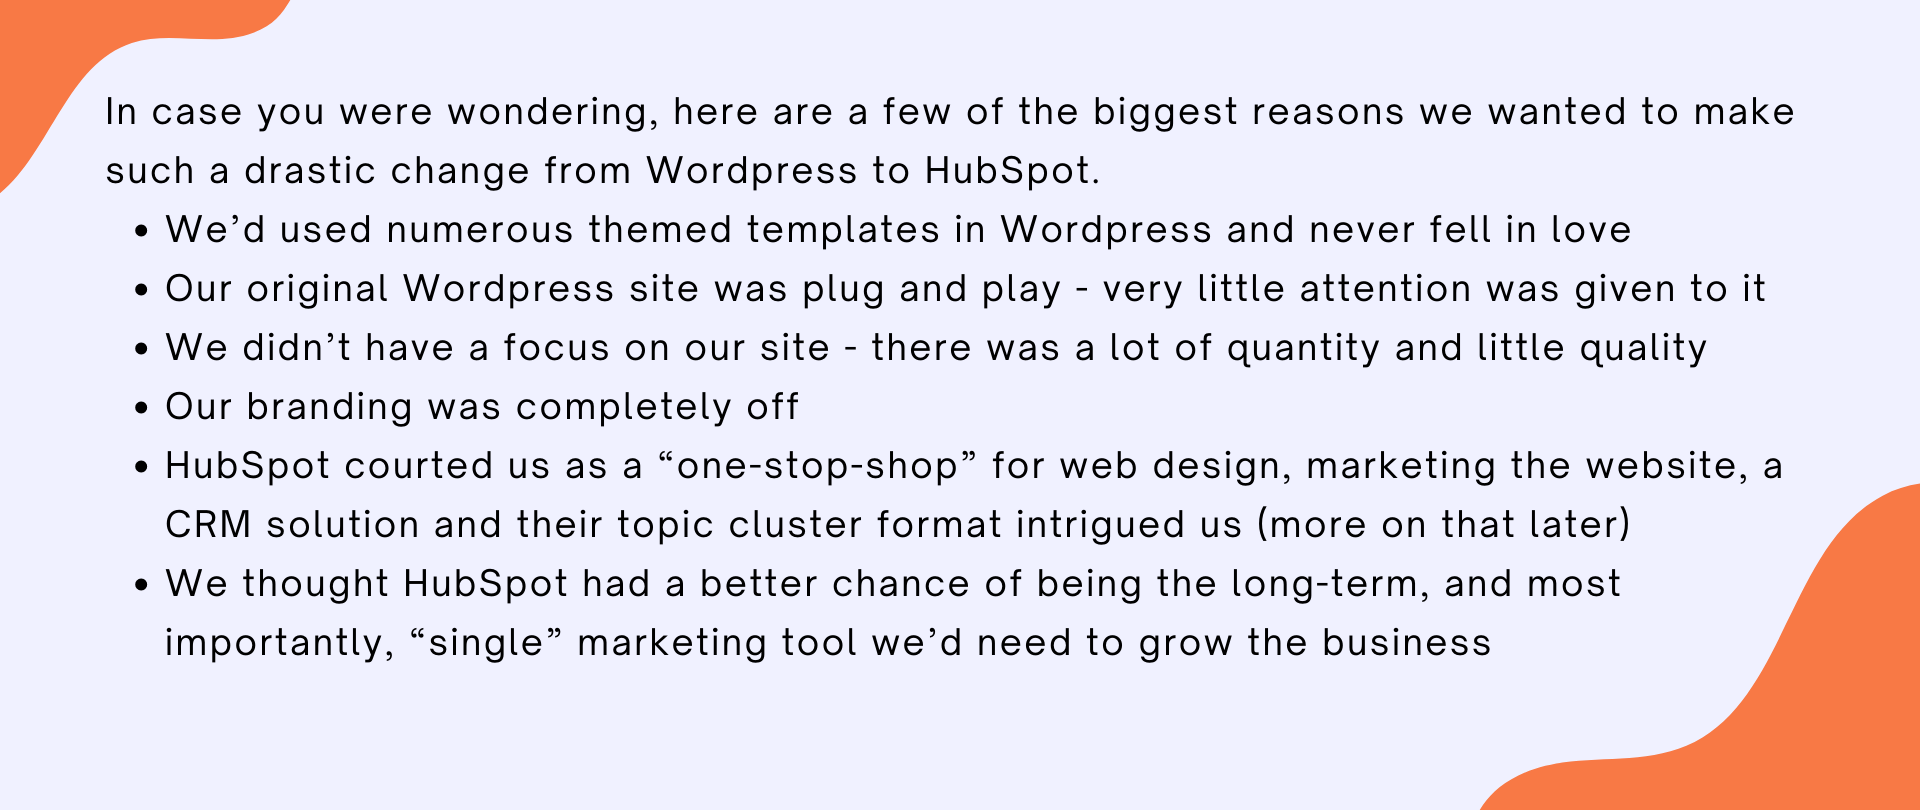 In case you were wondering, here are a few of the biggest reasons we wanted to make such a drastic change from Wordpress to HubSpot. We’d used numerous themed templates in Wordpress and never fell in love Our origina